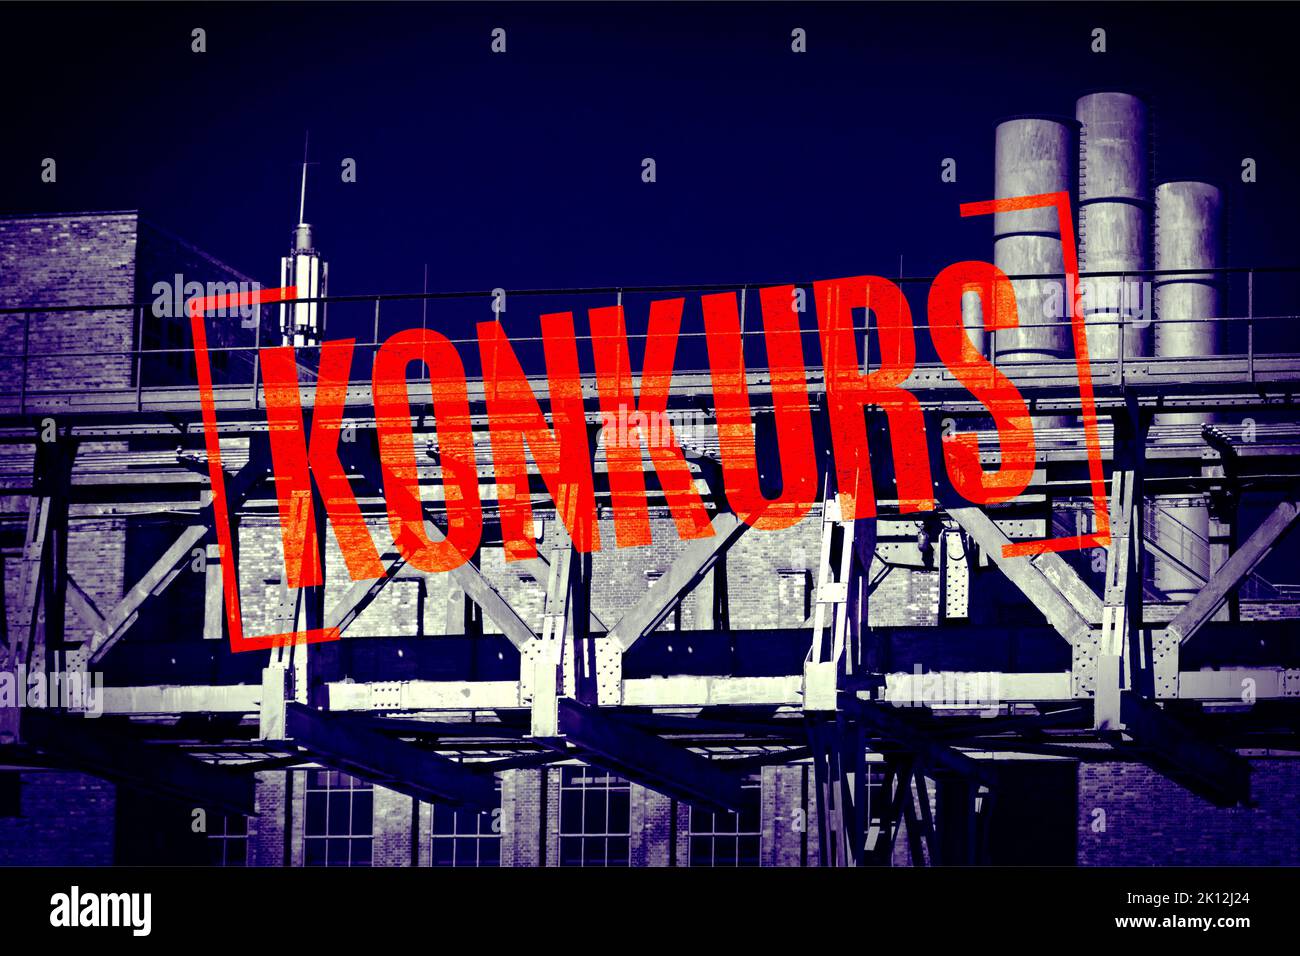 Economic crisis - The company is threatened with bankruptcy (German word 'Konkurs') Stock Photo